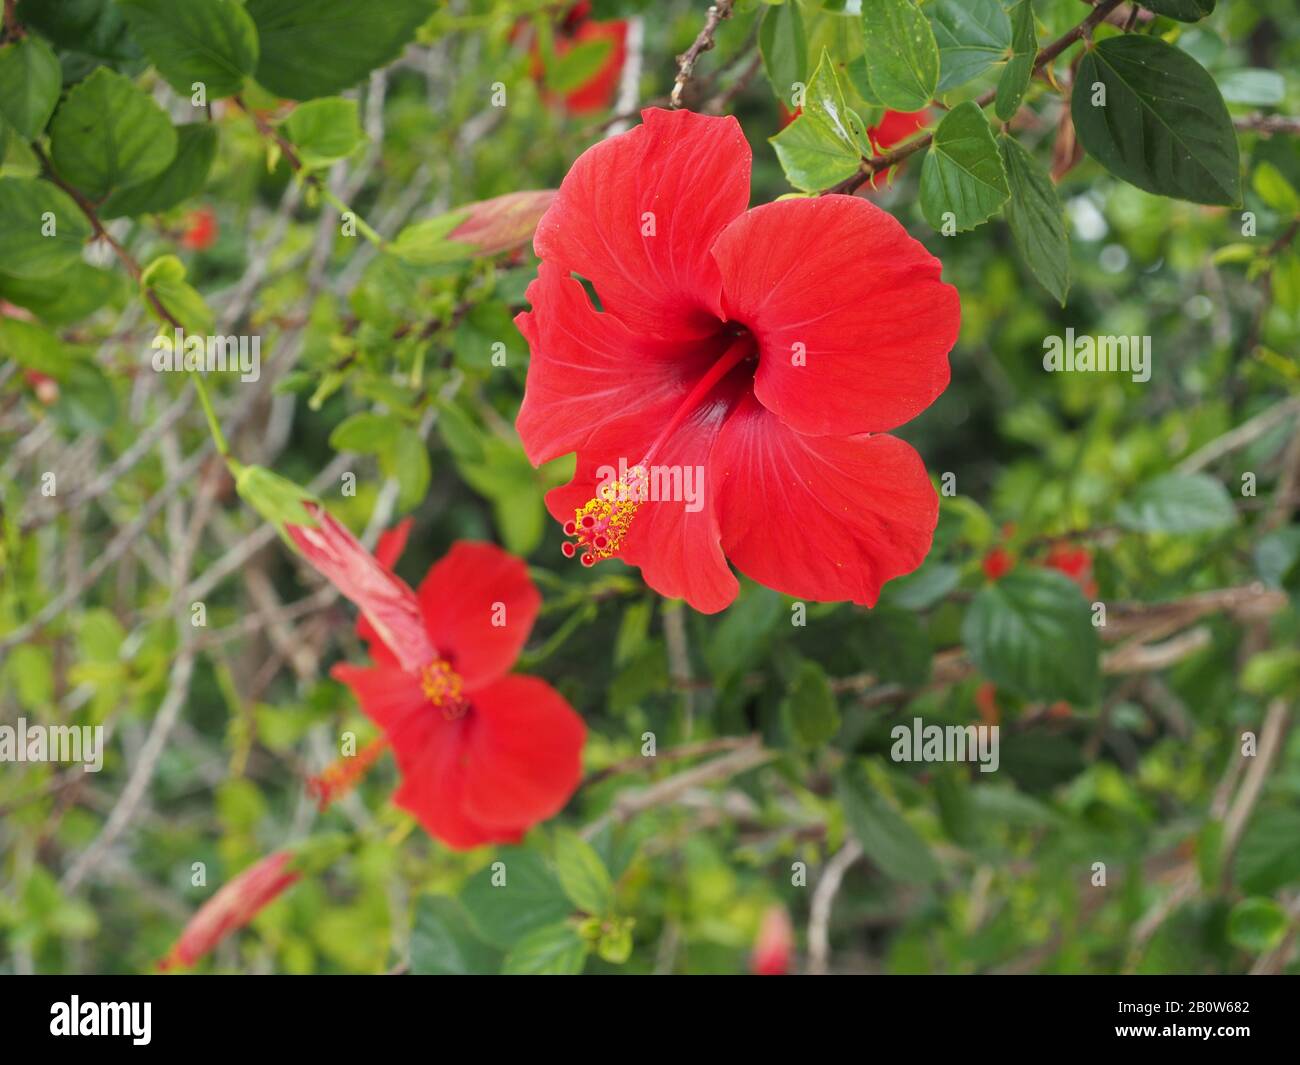 Hibiscus flowers growing in Greece. Part of the mallow family, Malvaceae. Stock Photo